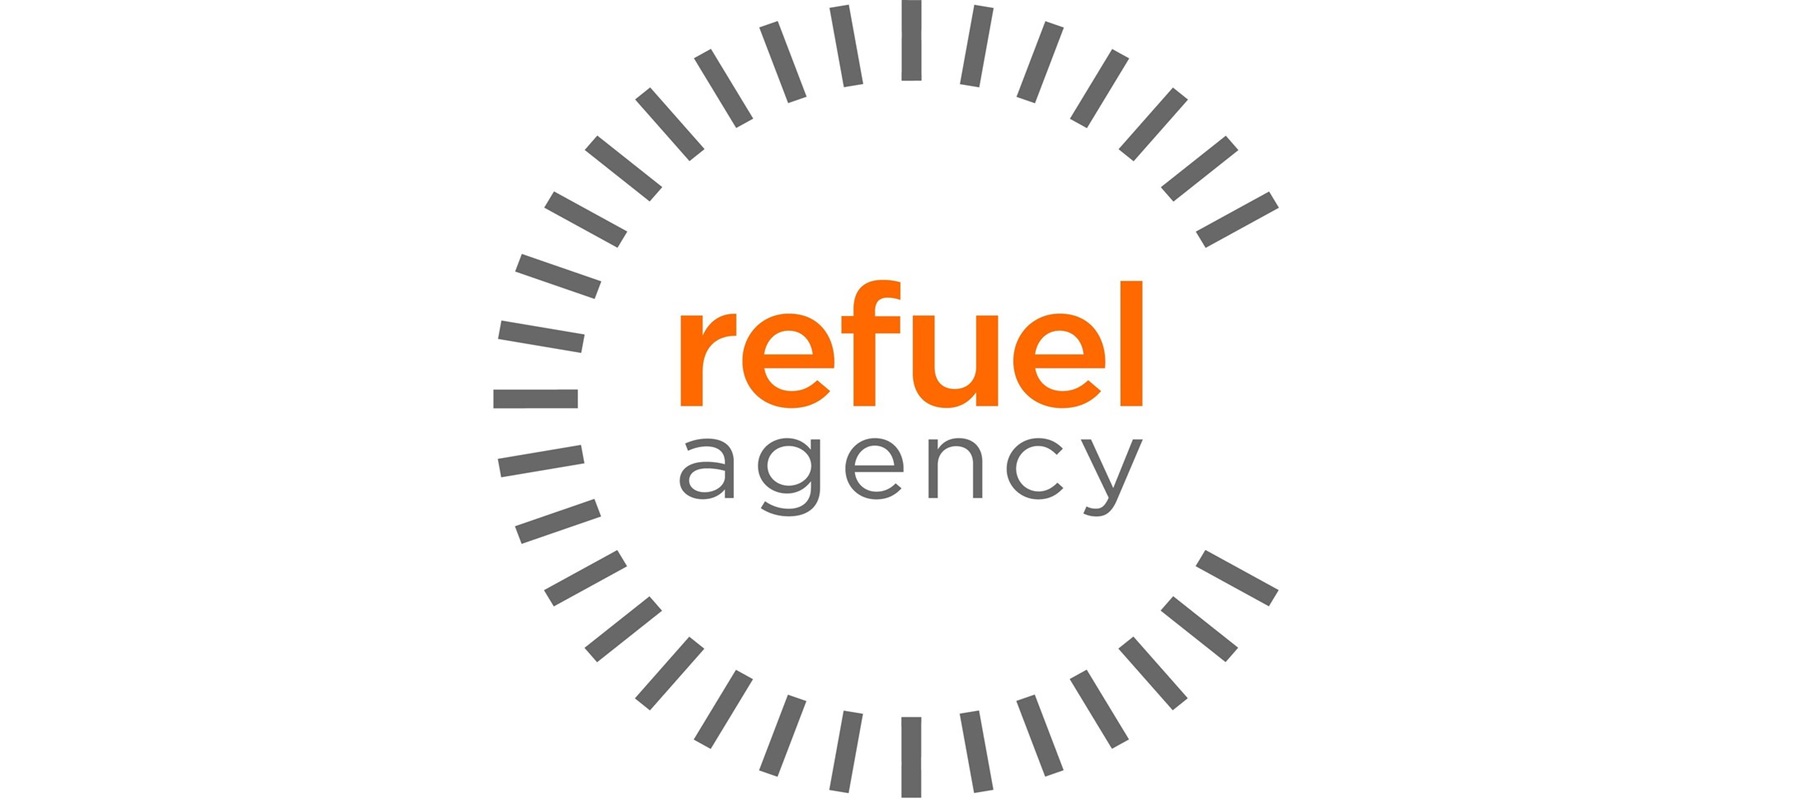 Marketing firm Refuel Agency partners with Wrench.AI to amplify campaigns through AI learning